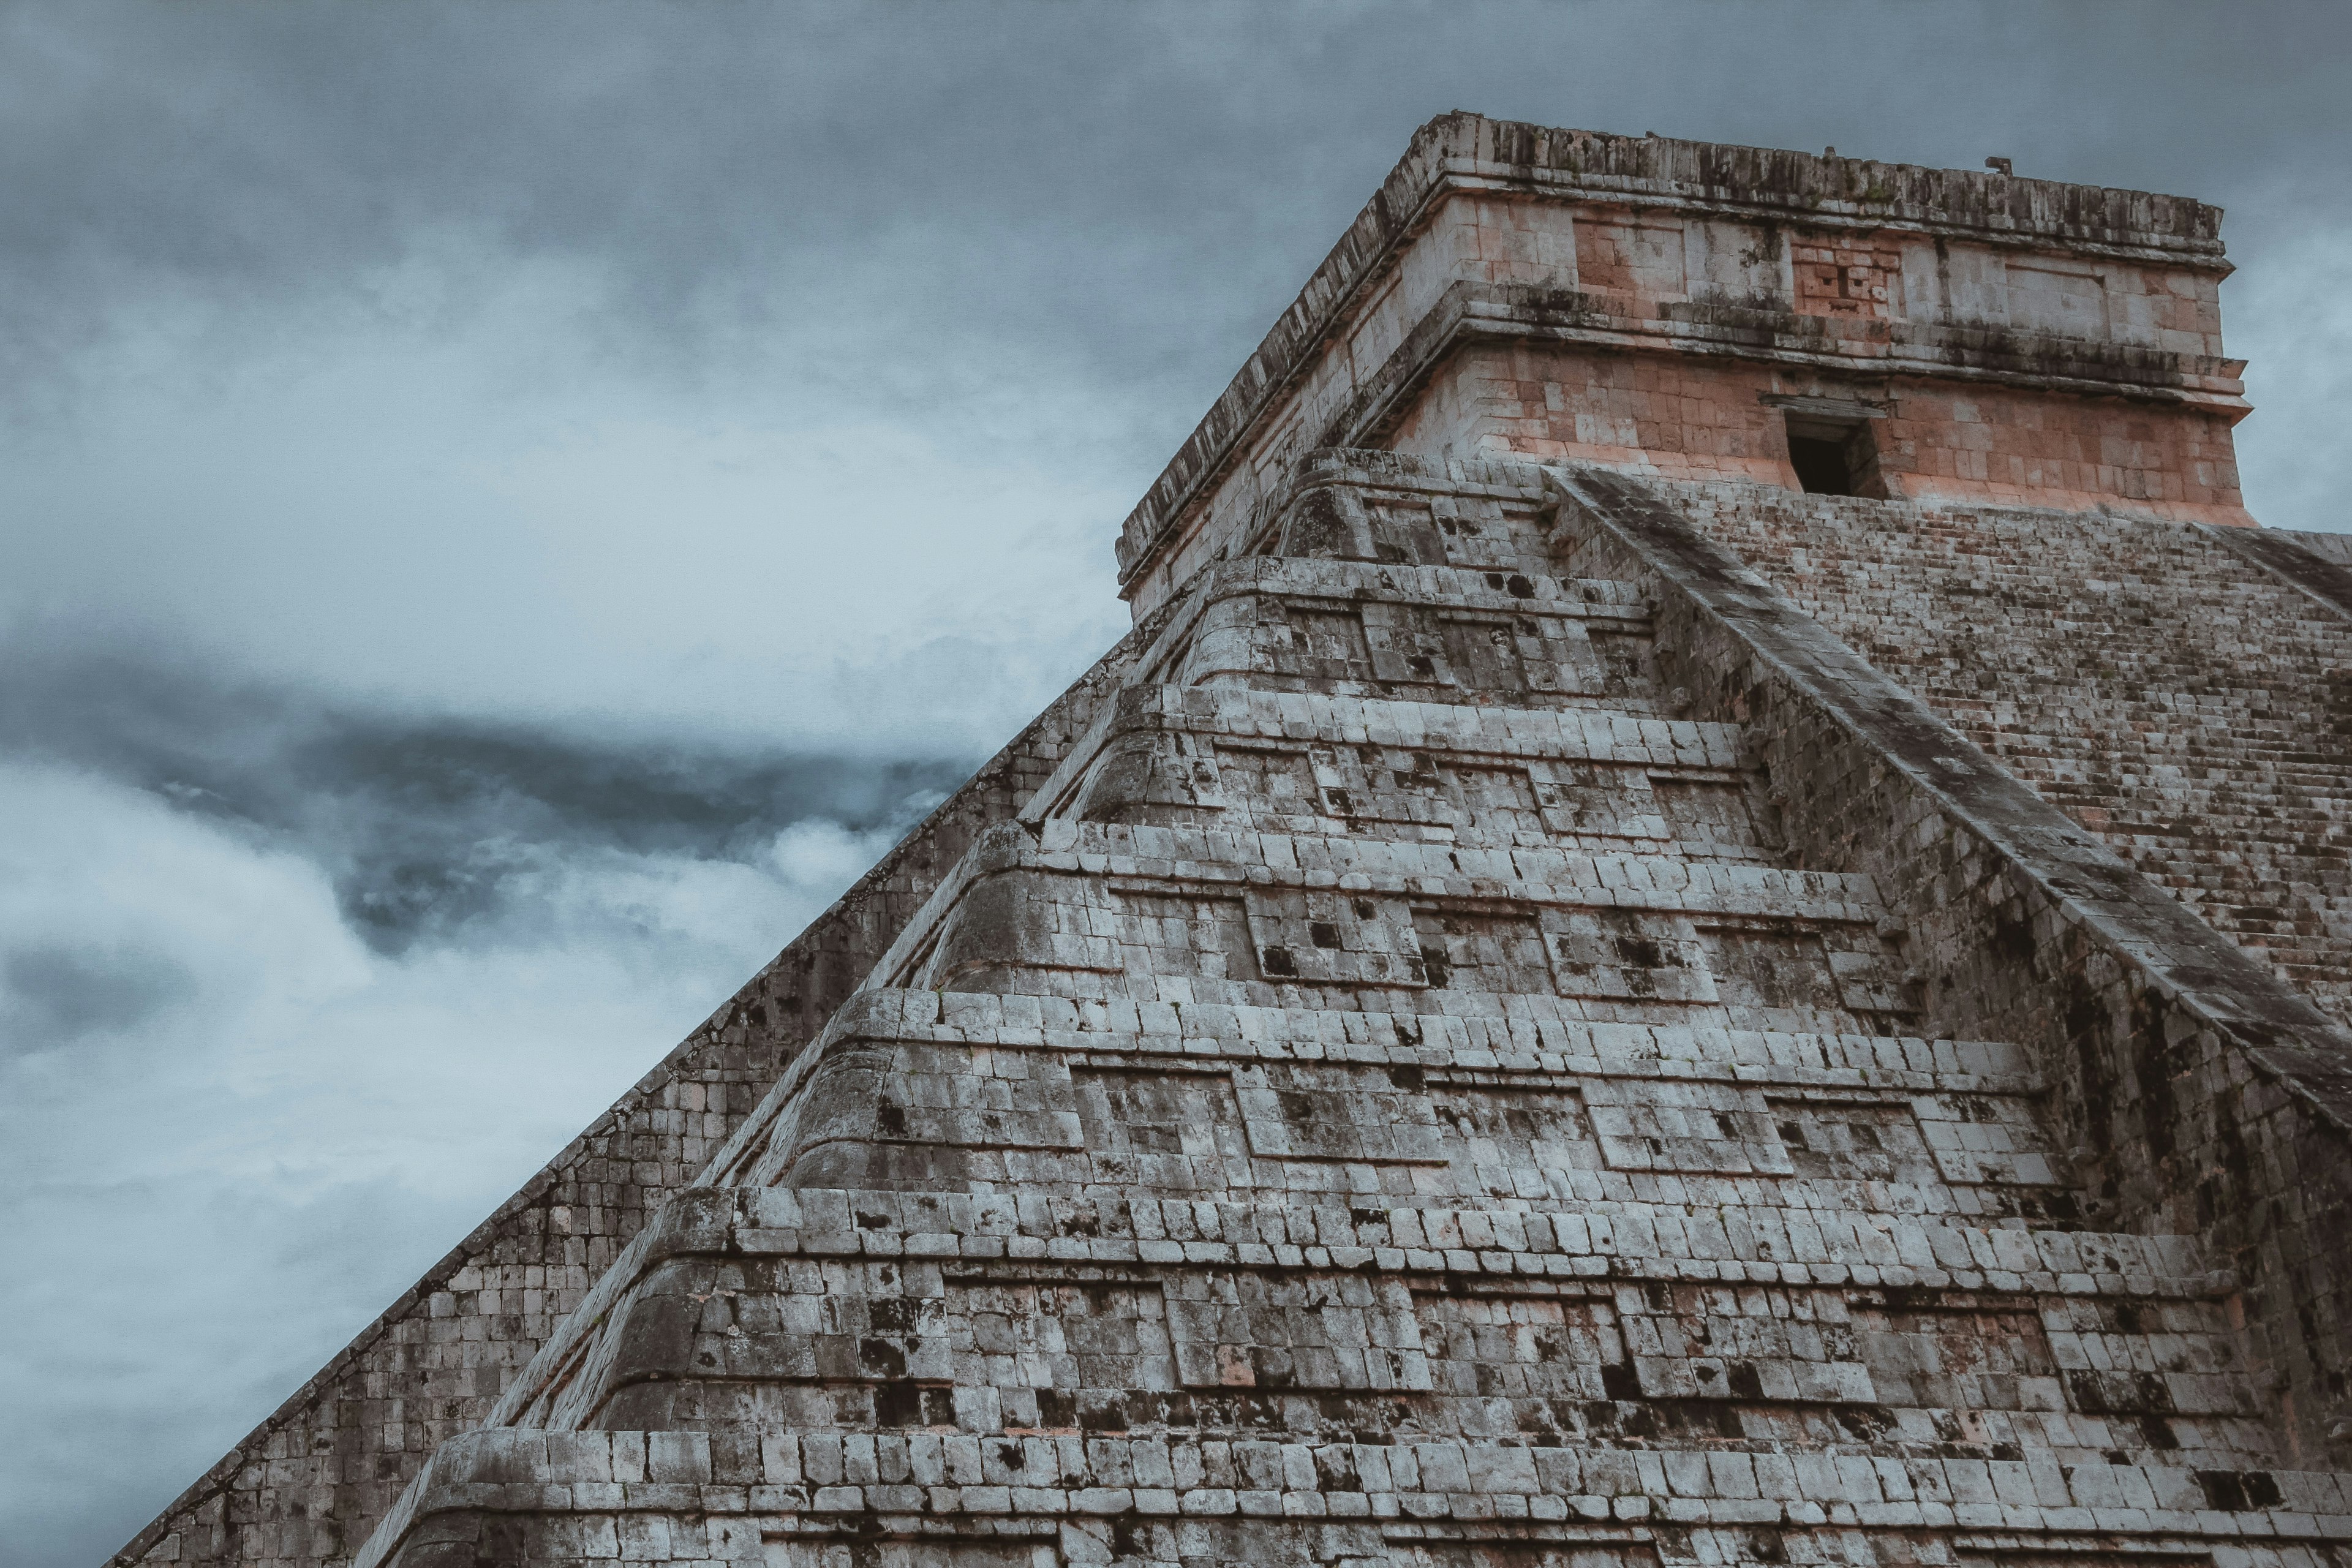 A photo of a stepped Mayan pyramid.